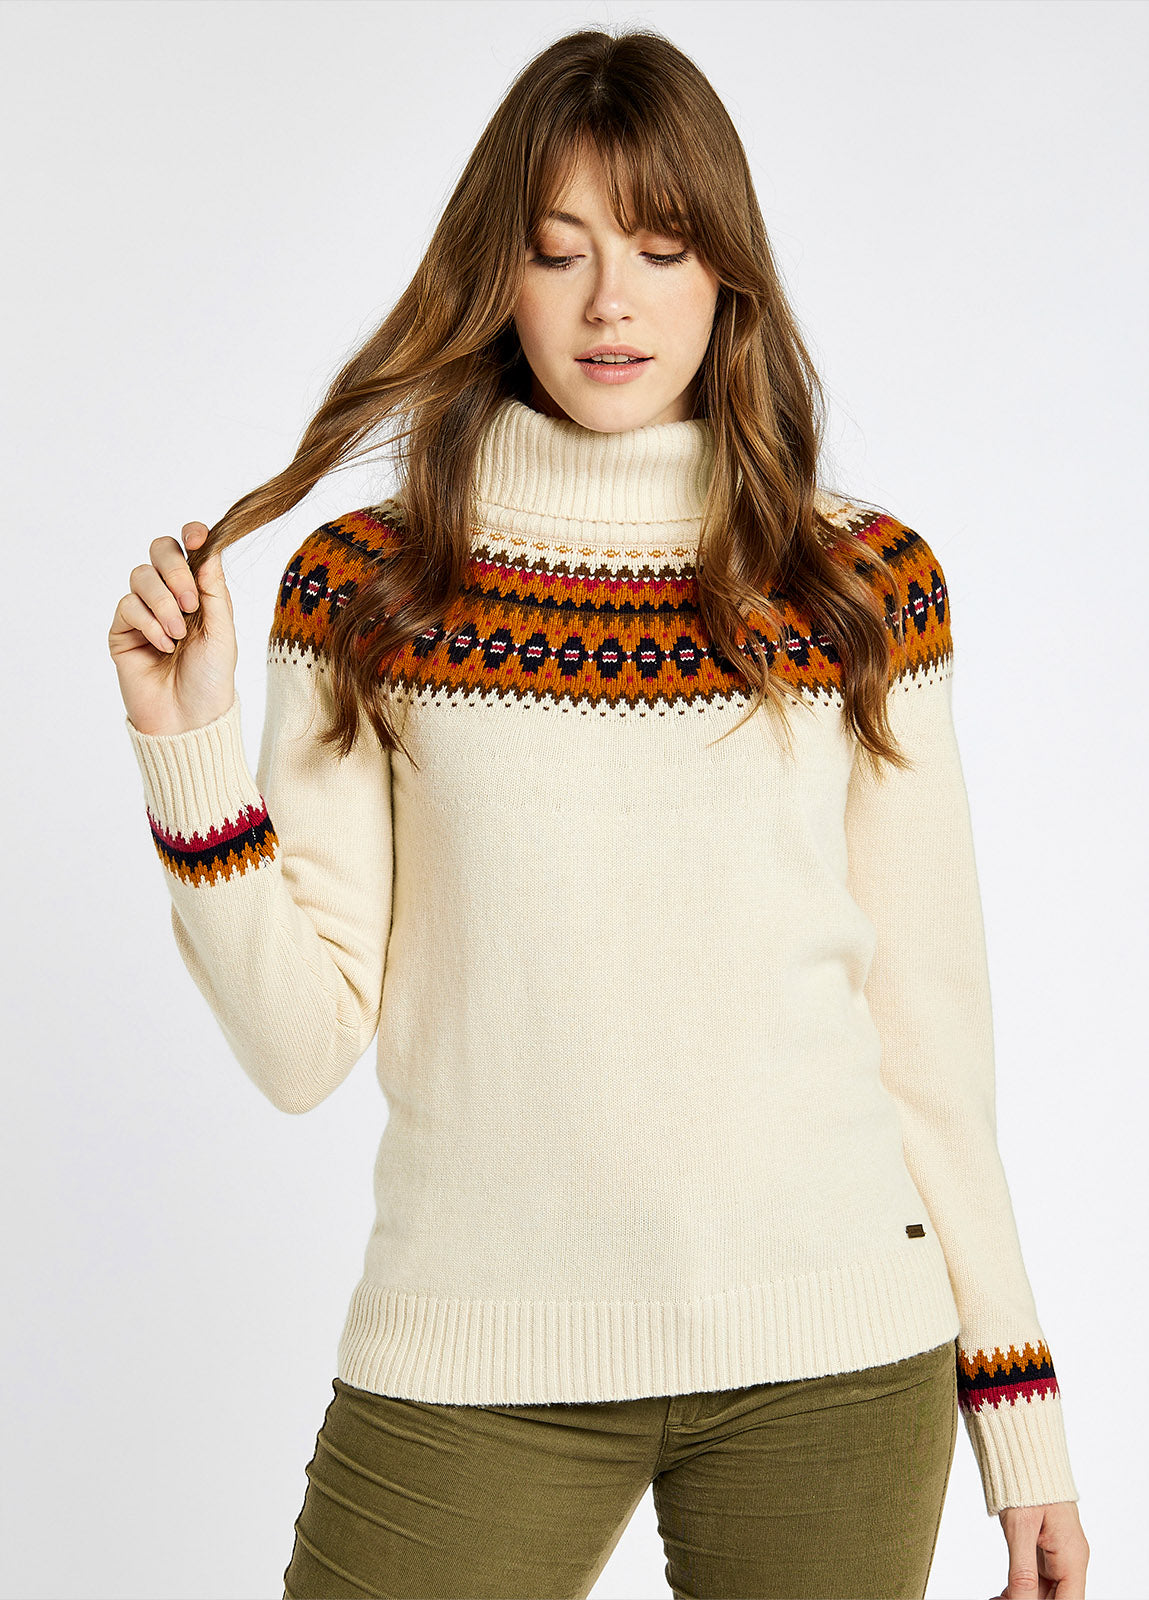 Dubarry Riverdale Knitted Sweater - Chalk